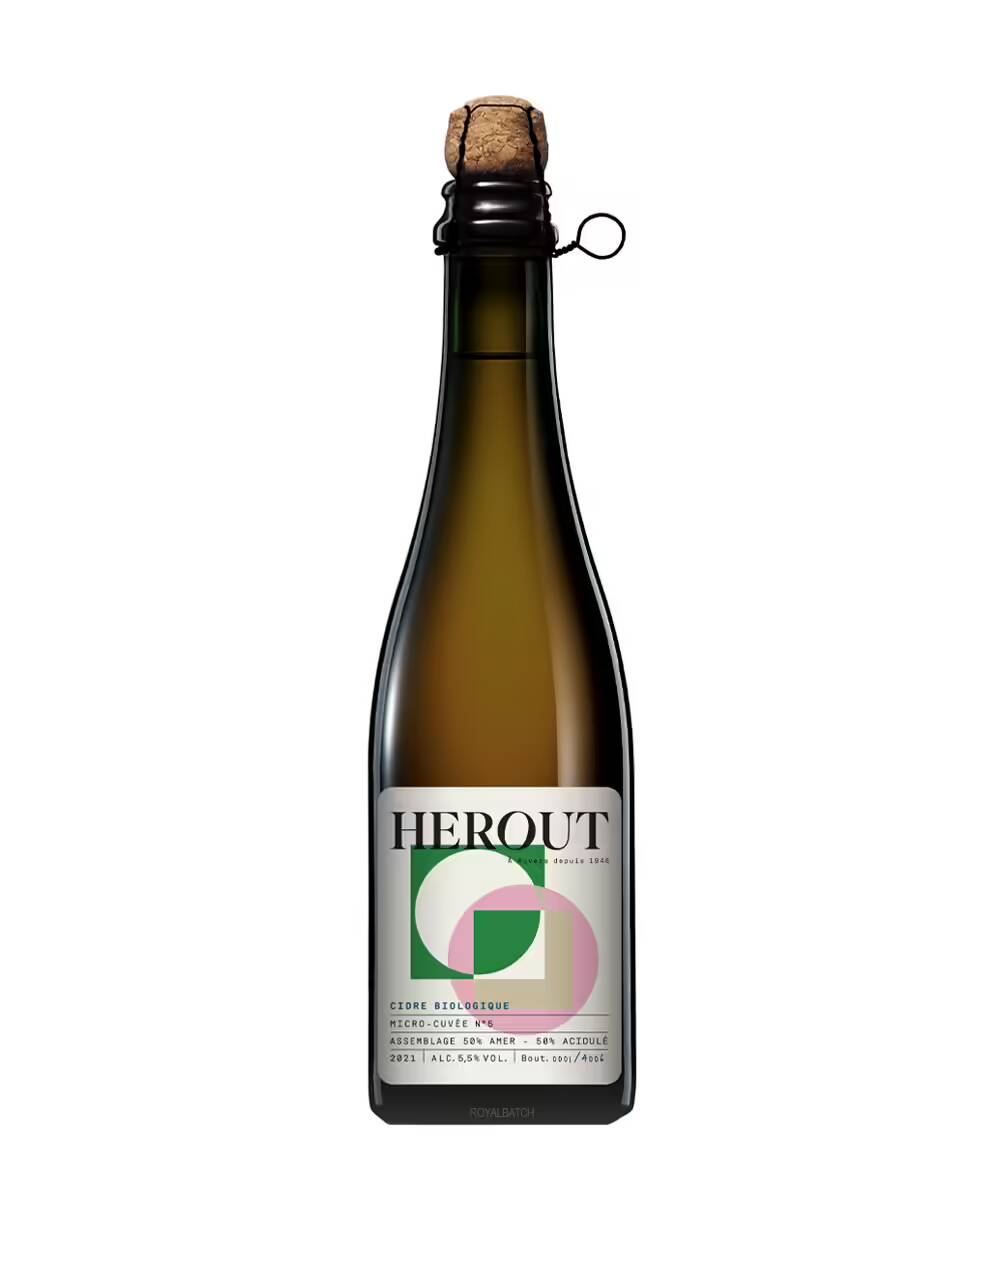 Herout Micro Cuvée No 5 Cider